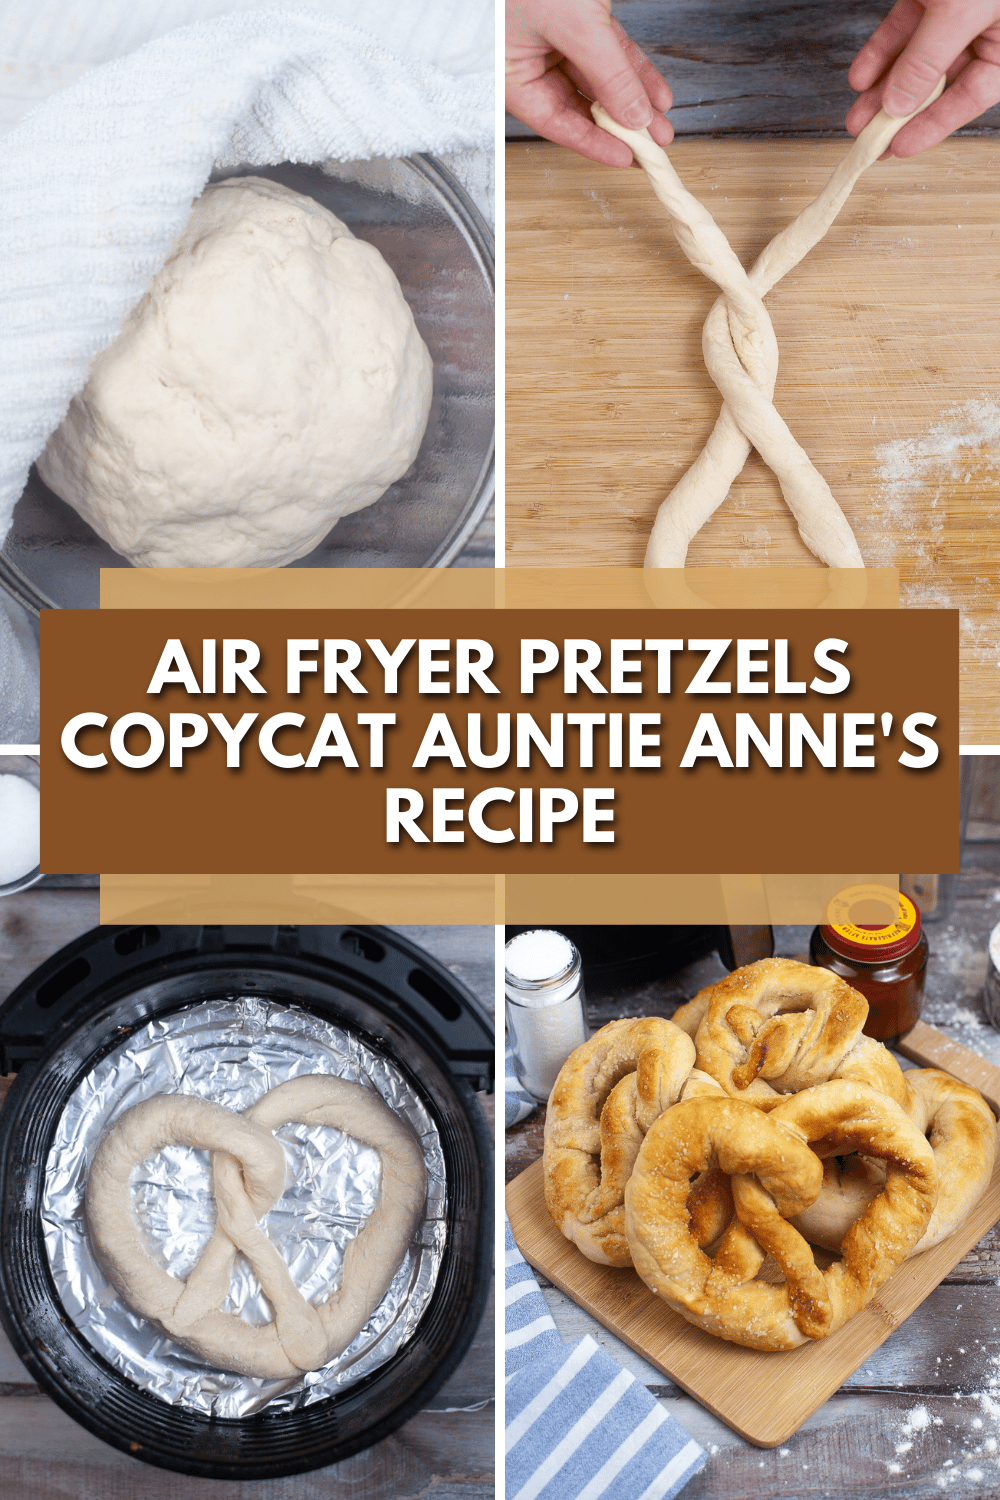 These Air Fryer Pretzels taste just like Auntie Anne’s, but you don’t have to leave the house or wait in line to get them. #airfryerpretzels #copycatauntieannespretzels #airfryer #softpretzels #homemadepretzels via @wondermomwannab